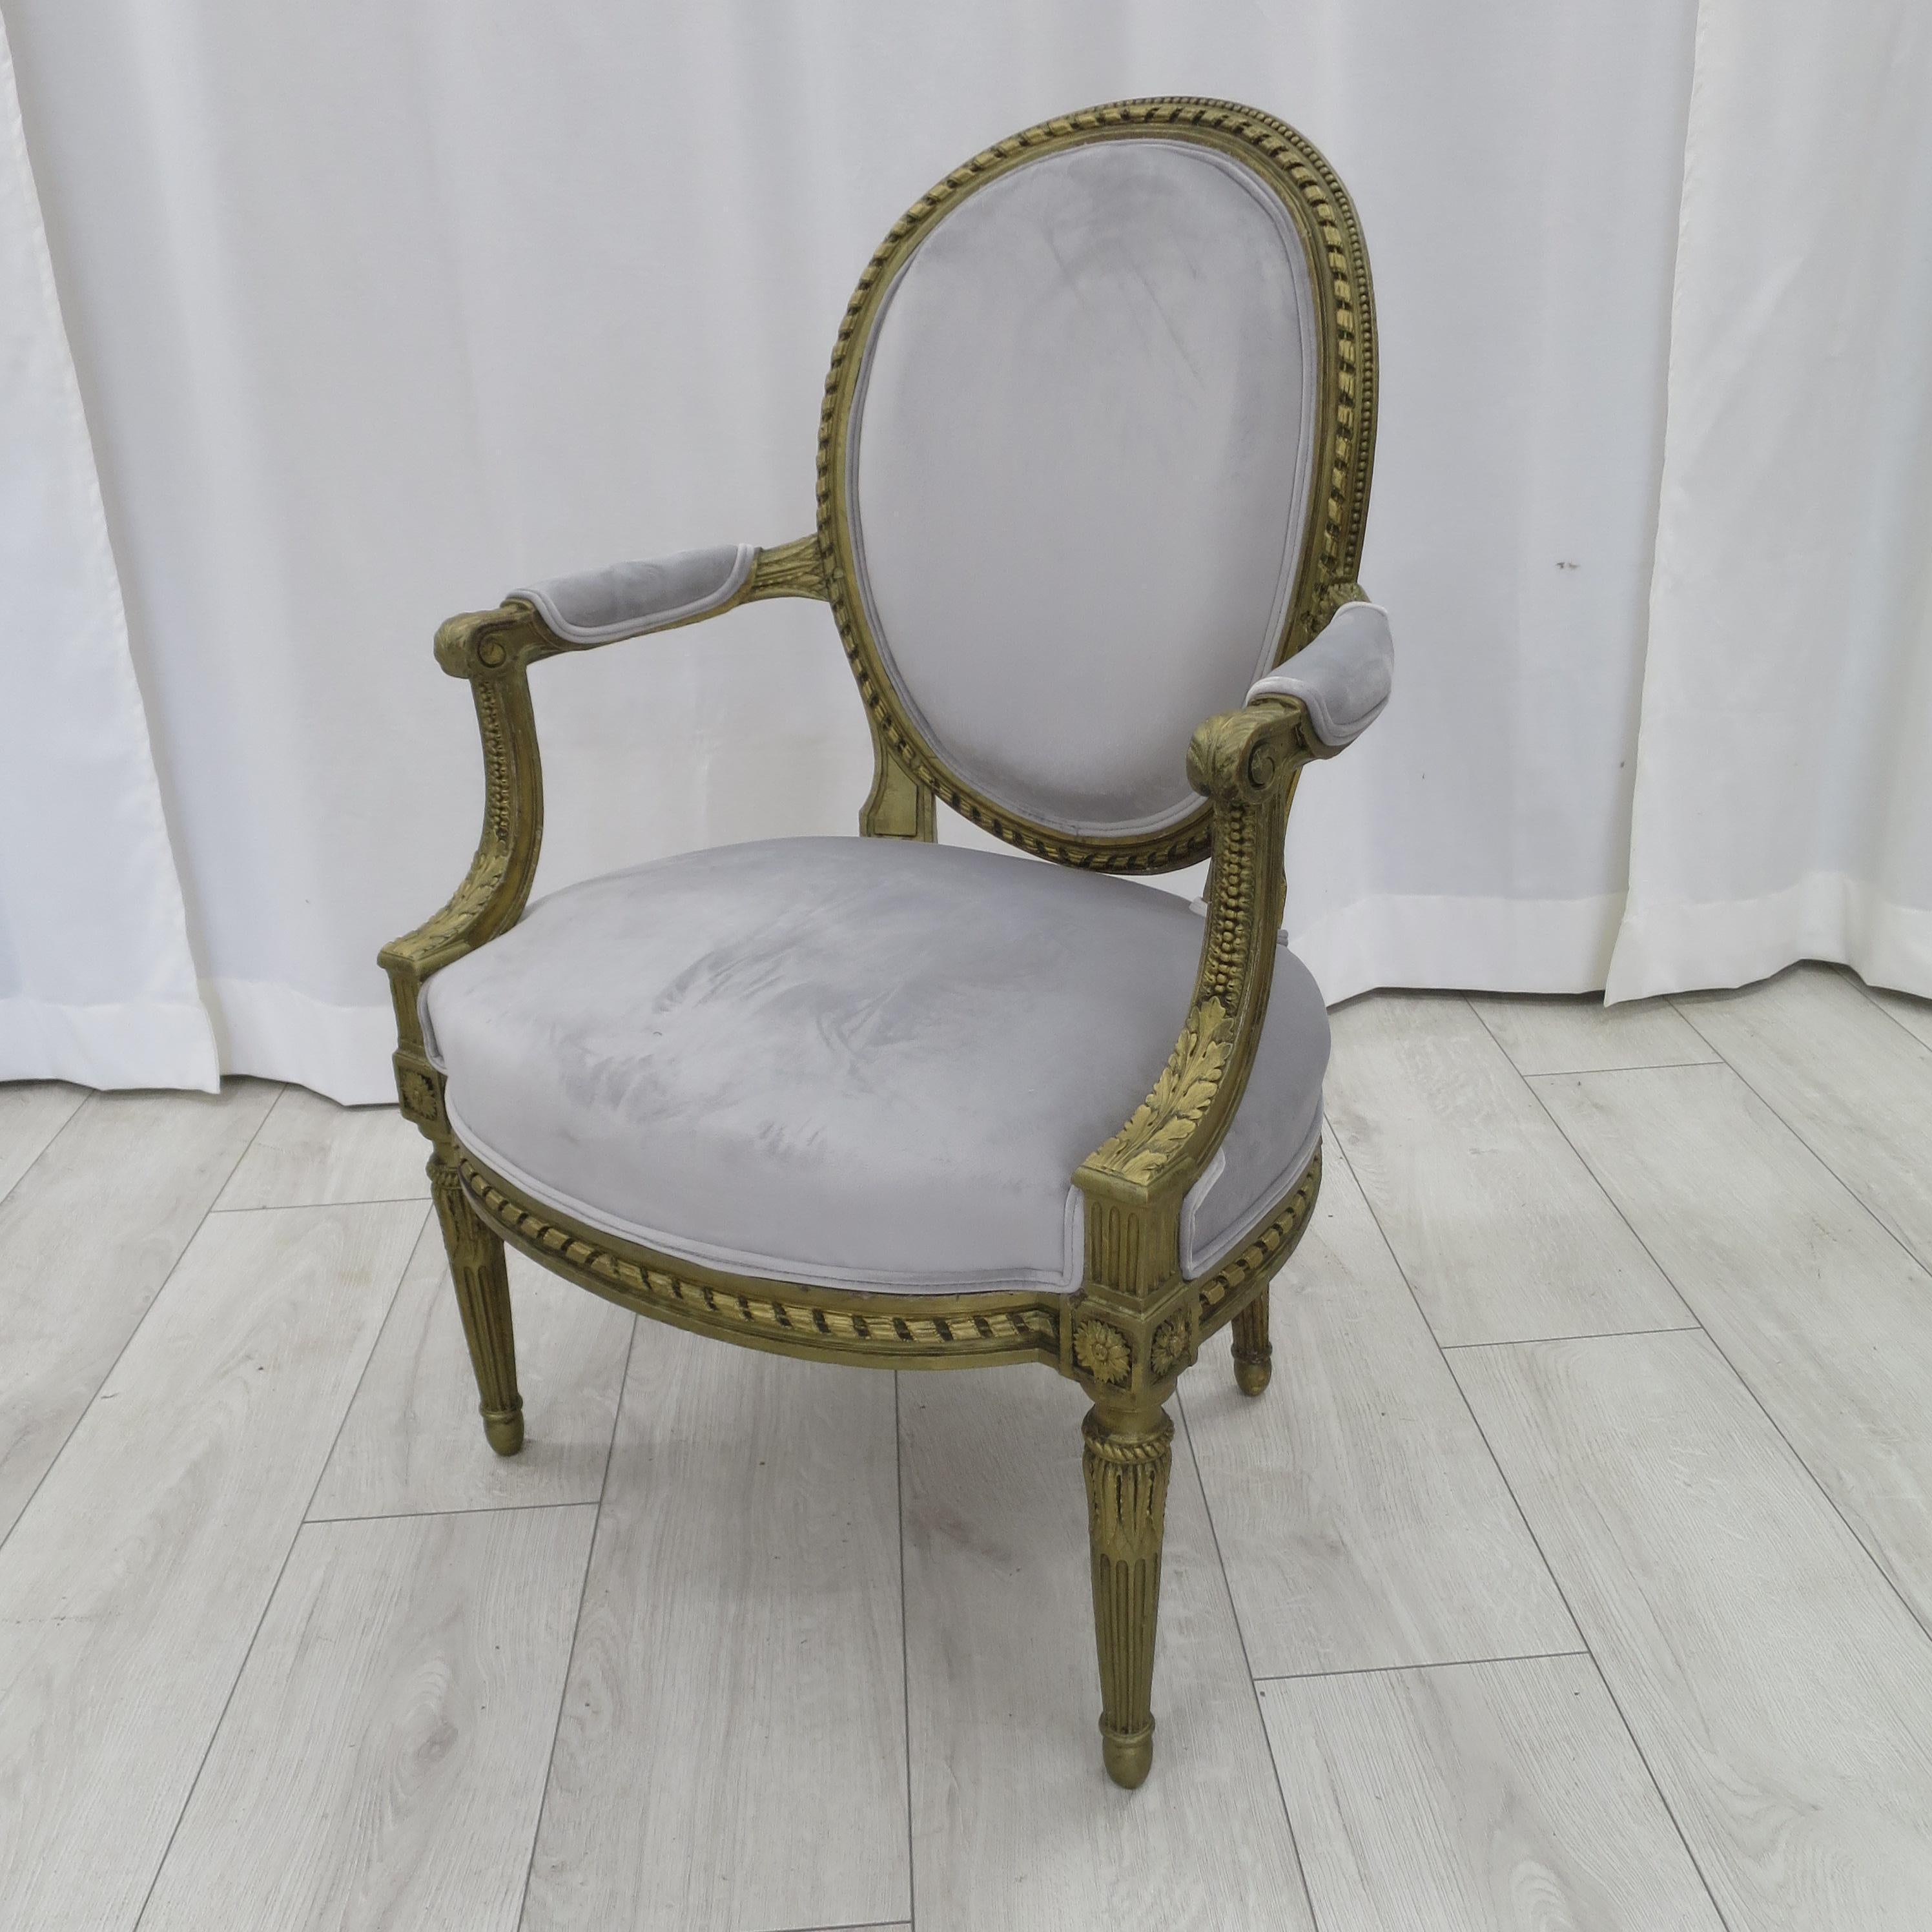 Pair of Cabriolet Armchairs in Giltwood 19th Century Style Louis XVI In Good Condition For Sale In Miami, FL